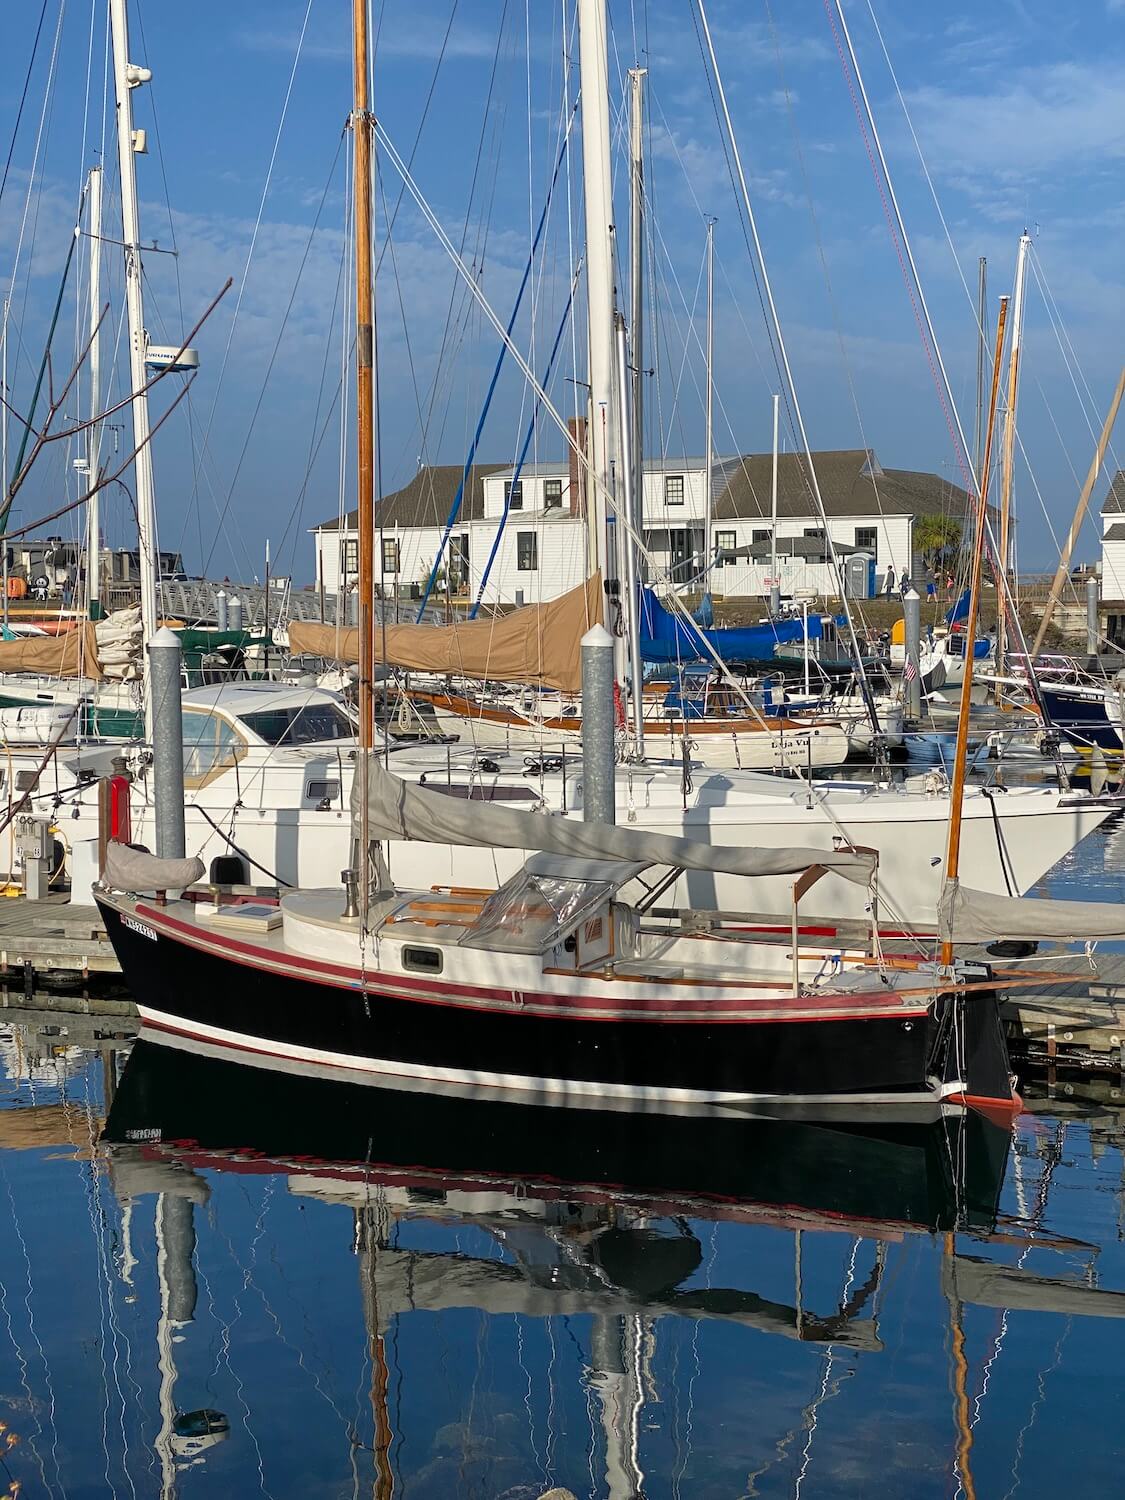 A wooden boat painted black with red accents sits in a harbor around a bunch of other sailboats. The reflection of the sailboat glows in the water under the blue sky.